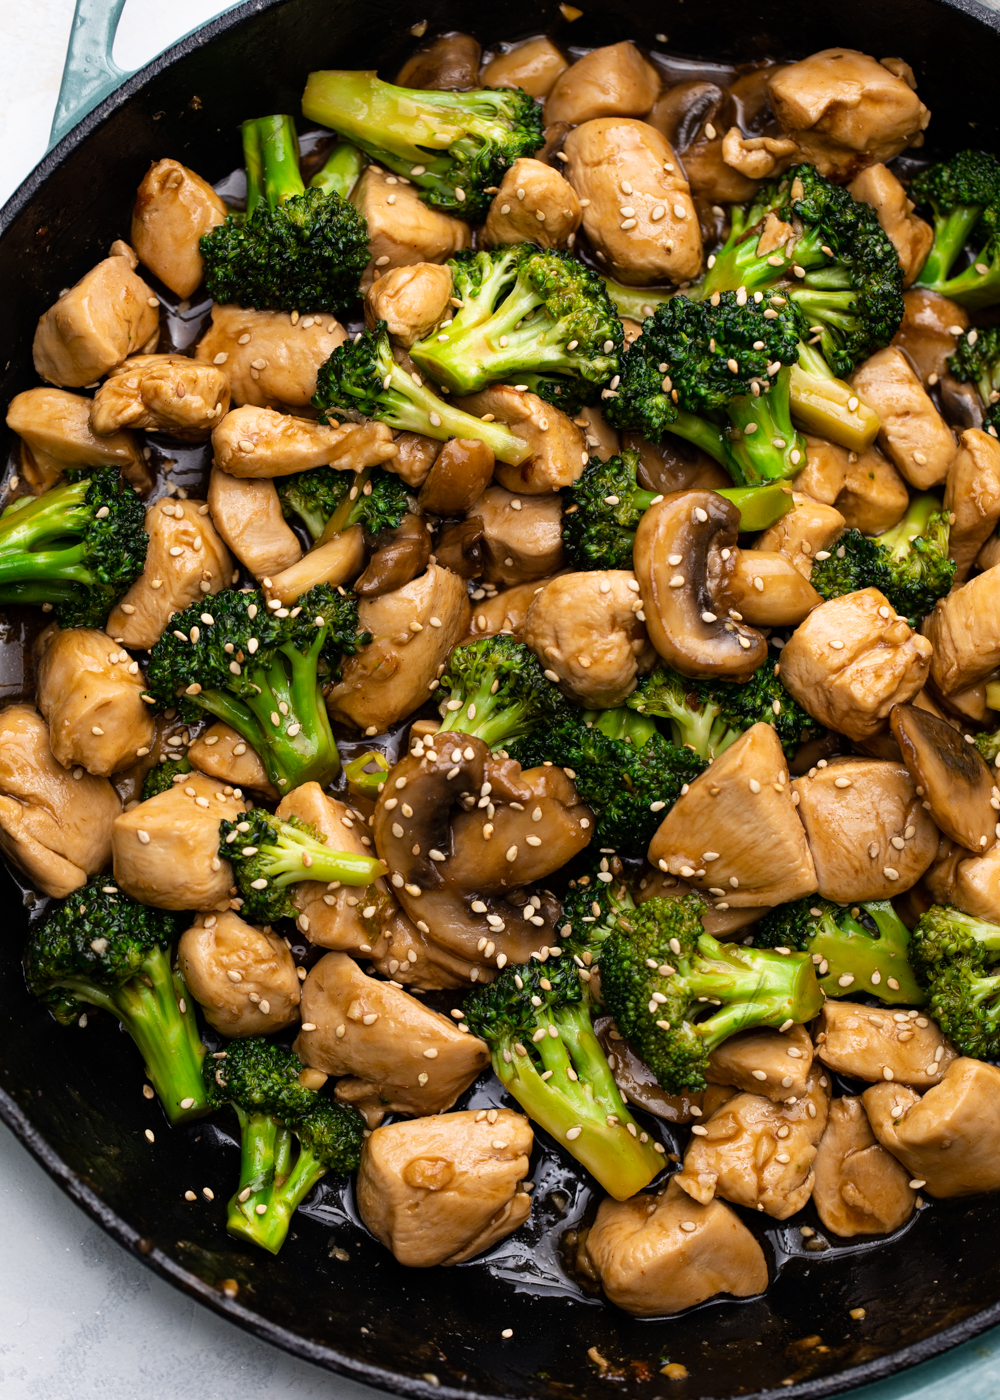 20 Minute Chicken Broccoli Stir Fry Gimme Delicious